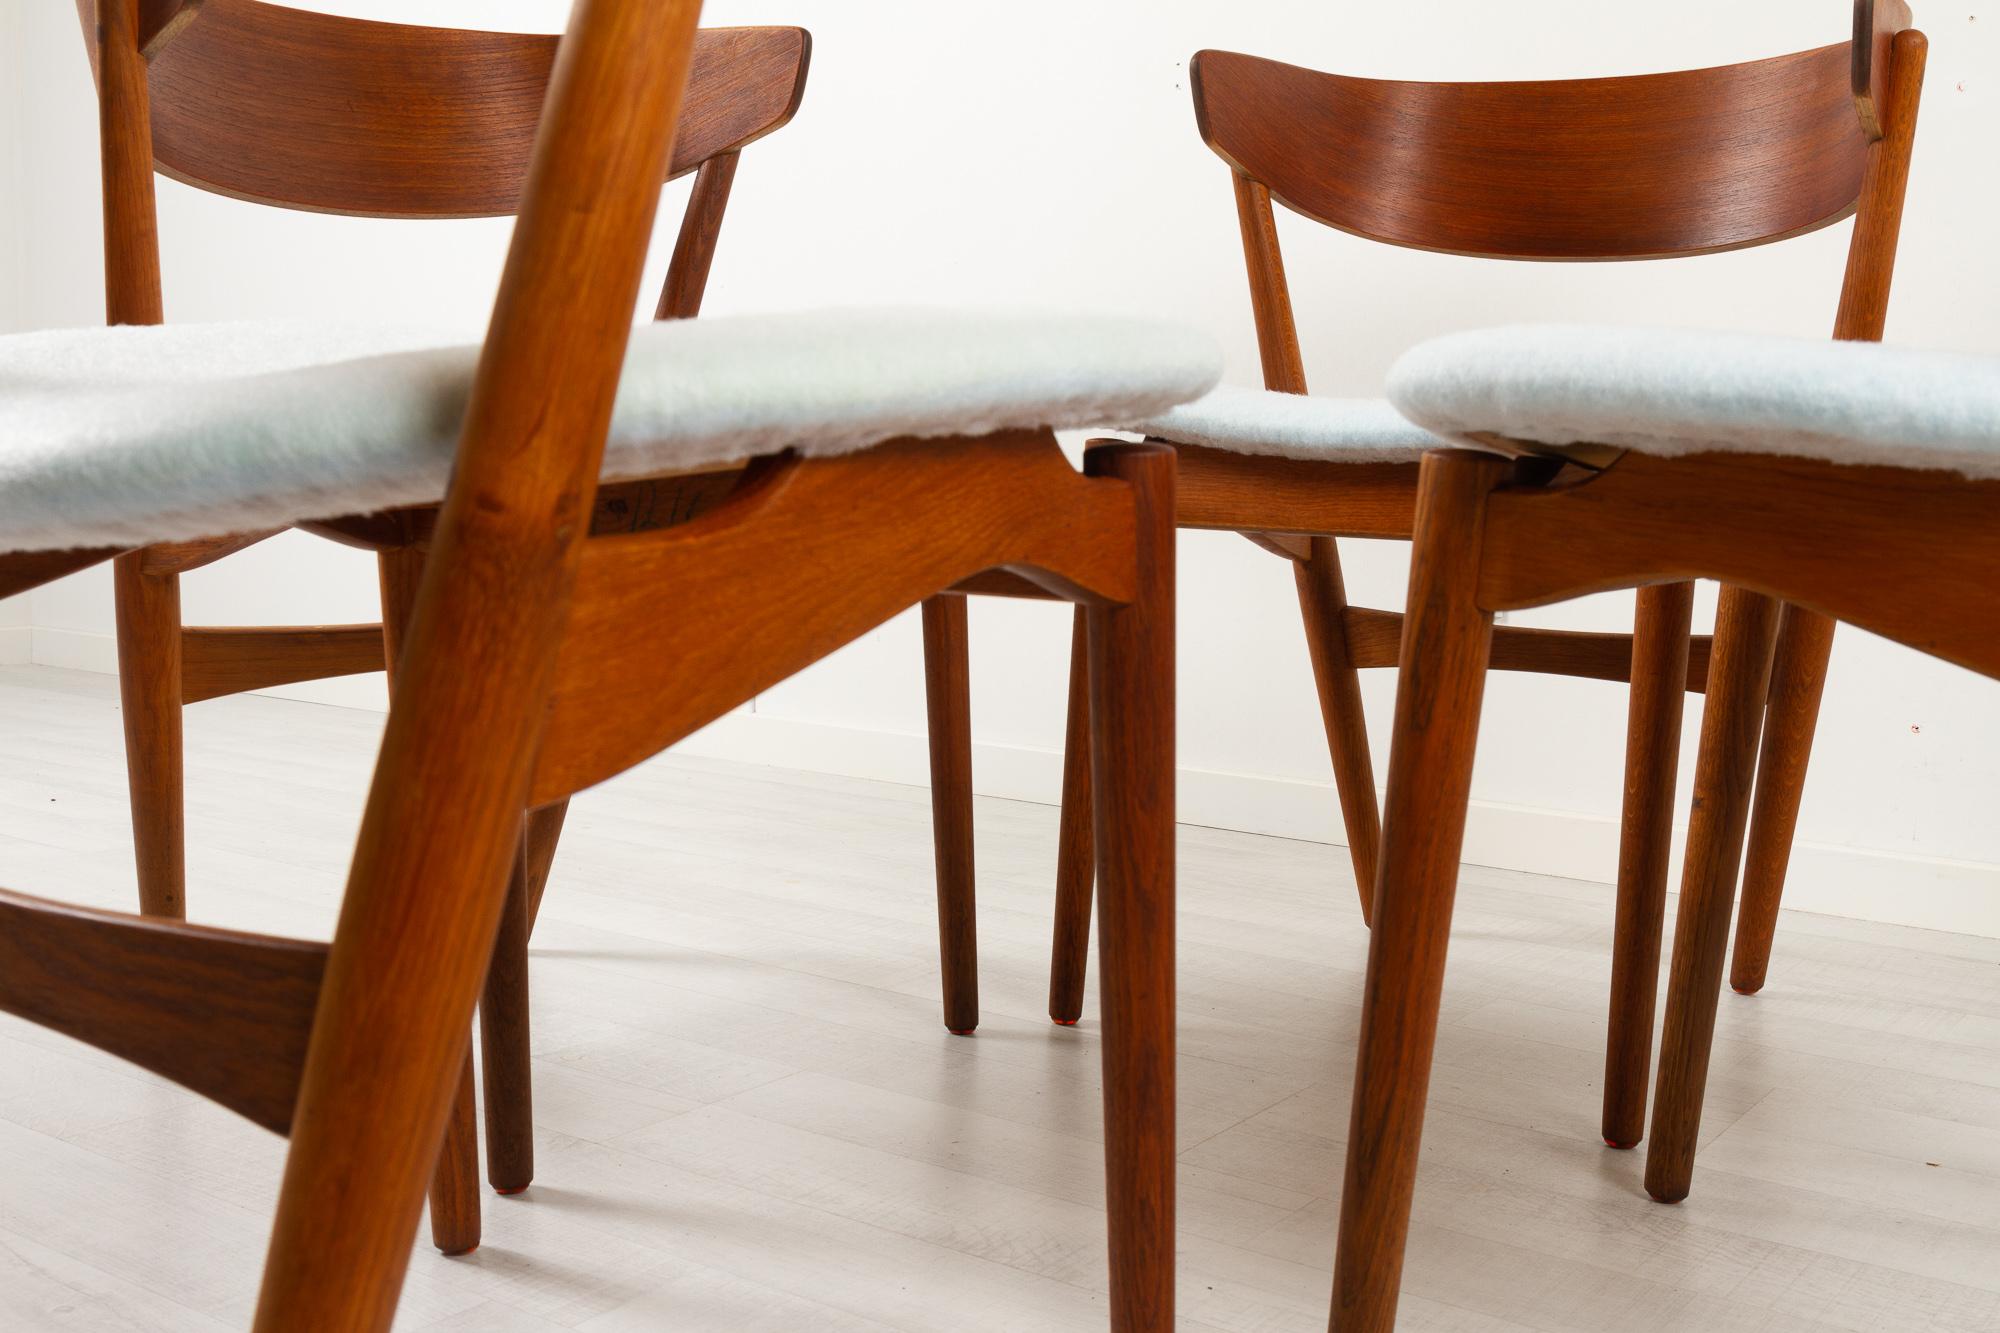 Vintage Danish Teak Dining Chairs No. 7 by Helge Sibast 1960s Set of 4 For Sale 2